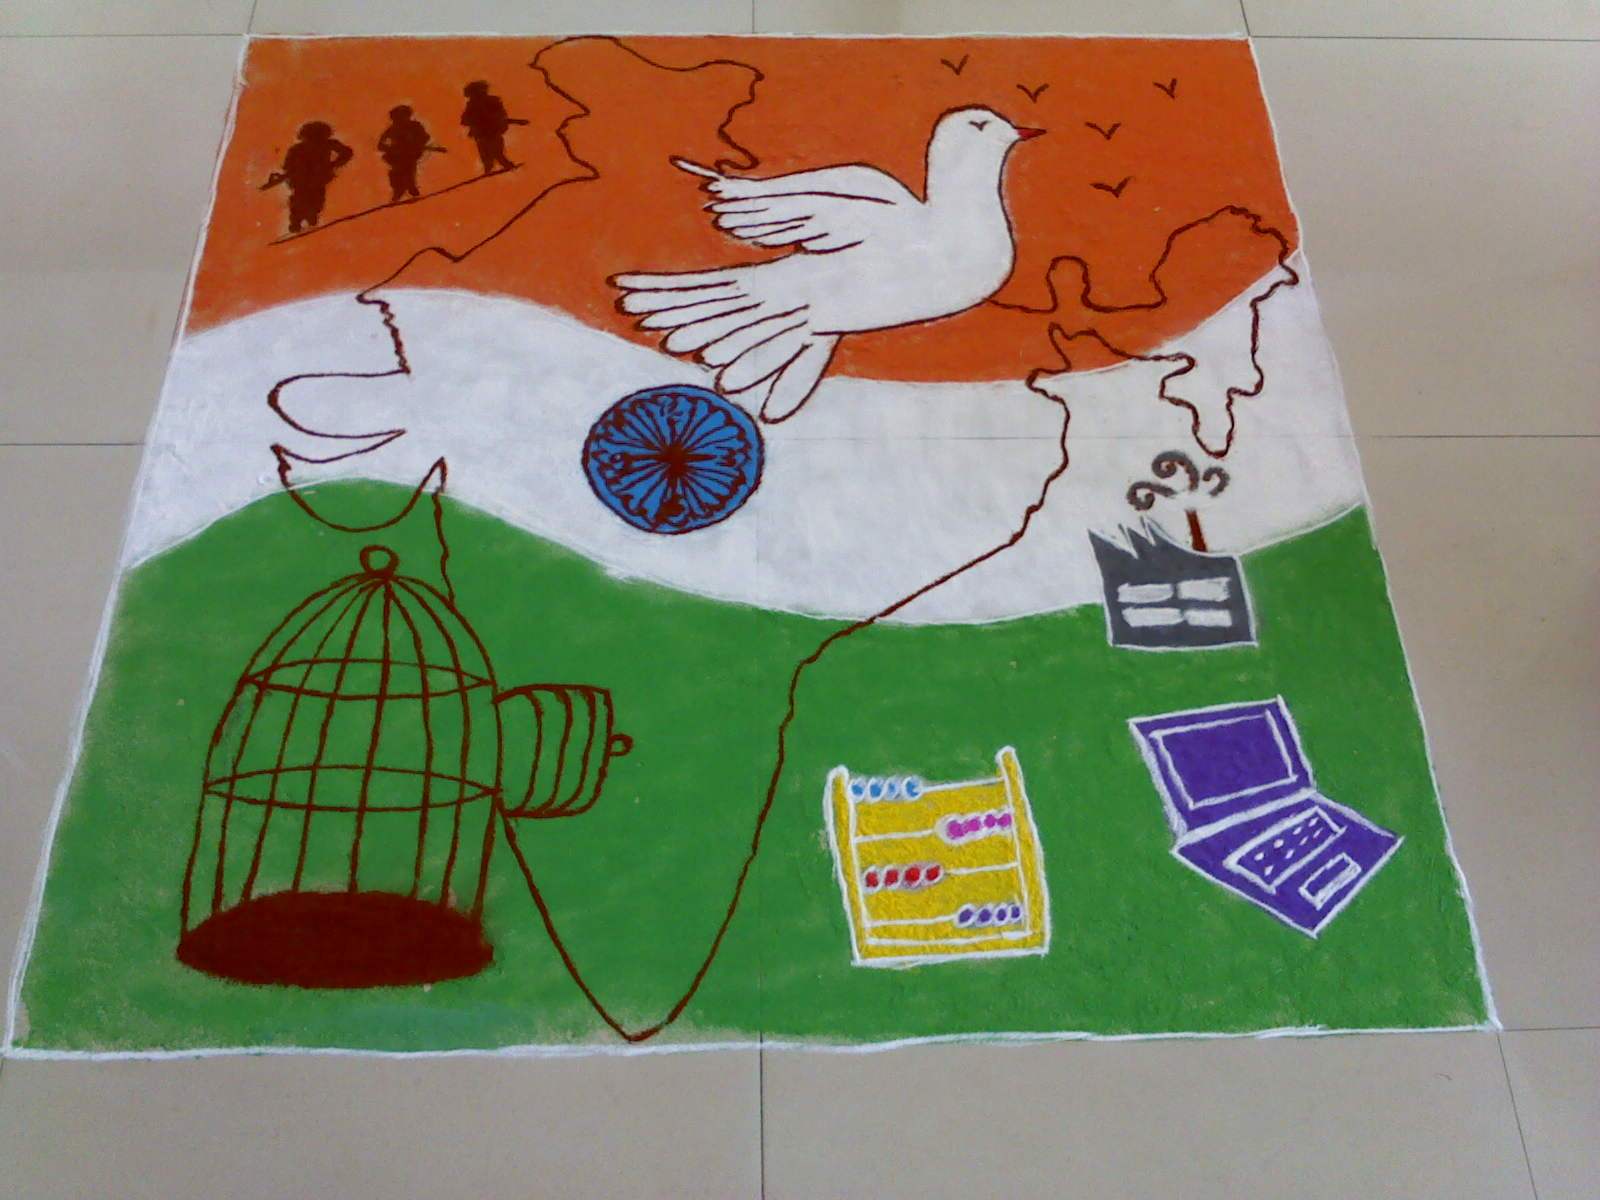 Handmade Poster On Republic Day 26 January 2019 Yupstory Hello guys, in this video i am drawing a drawing on republic day which happens every year on 26th of january in india. handmade poster on republic day 26